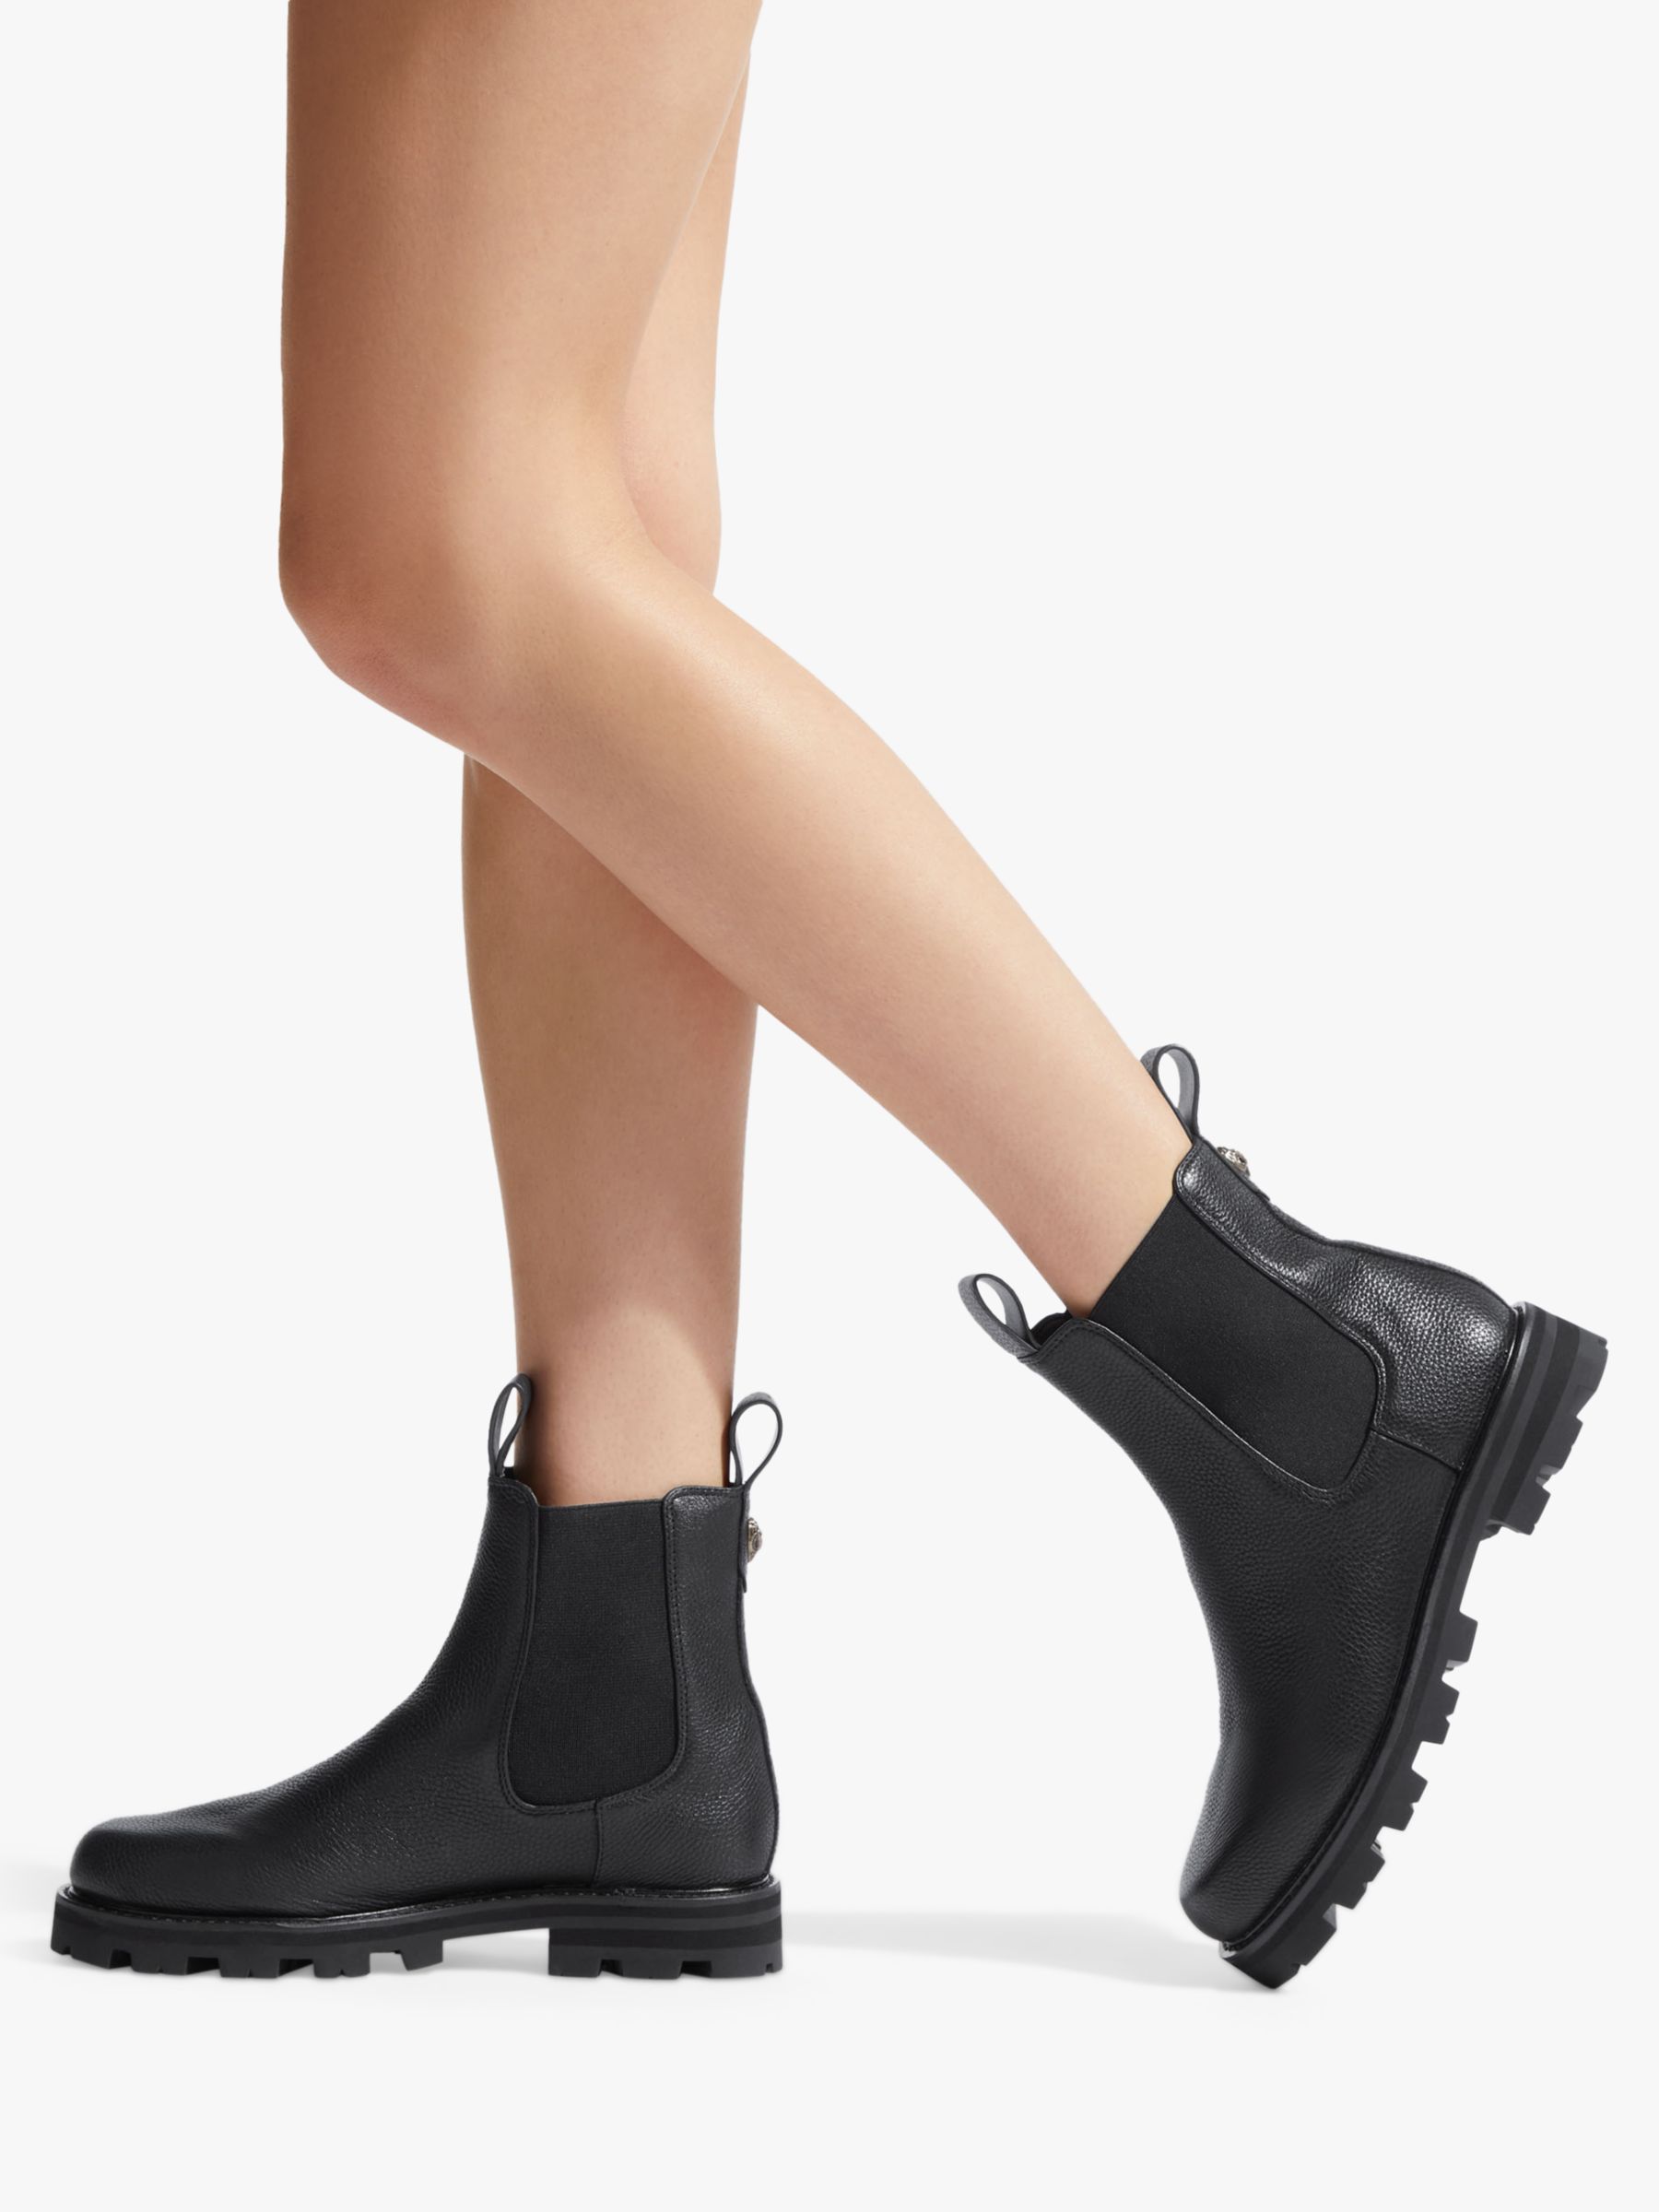 Buy Kurt Geiger London Carnaby Leather Chelsea Boots, Black Online at johnlewis.com